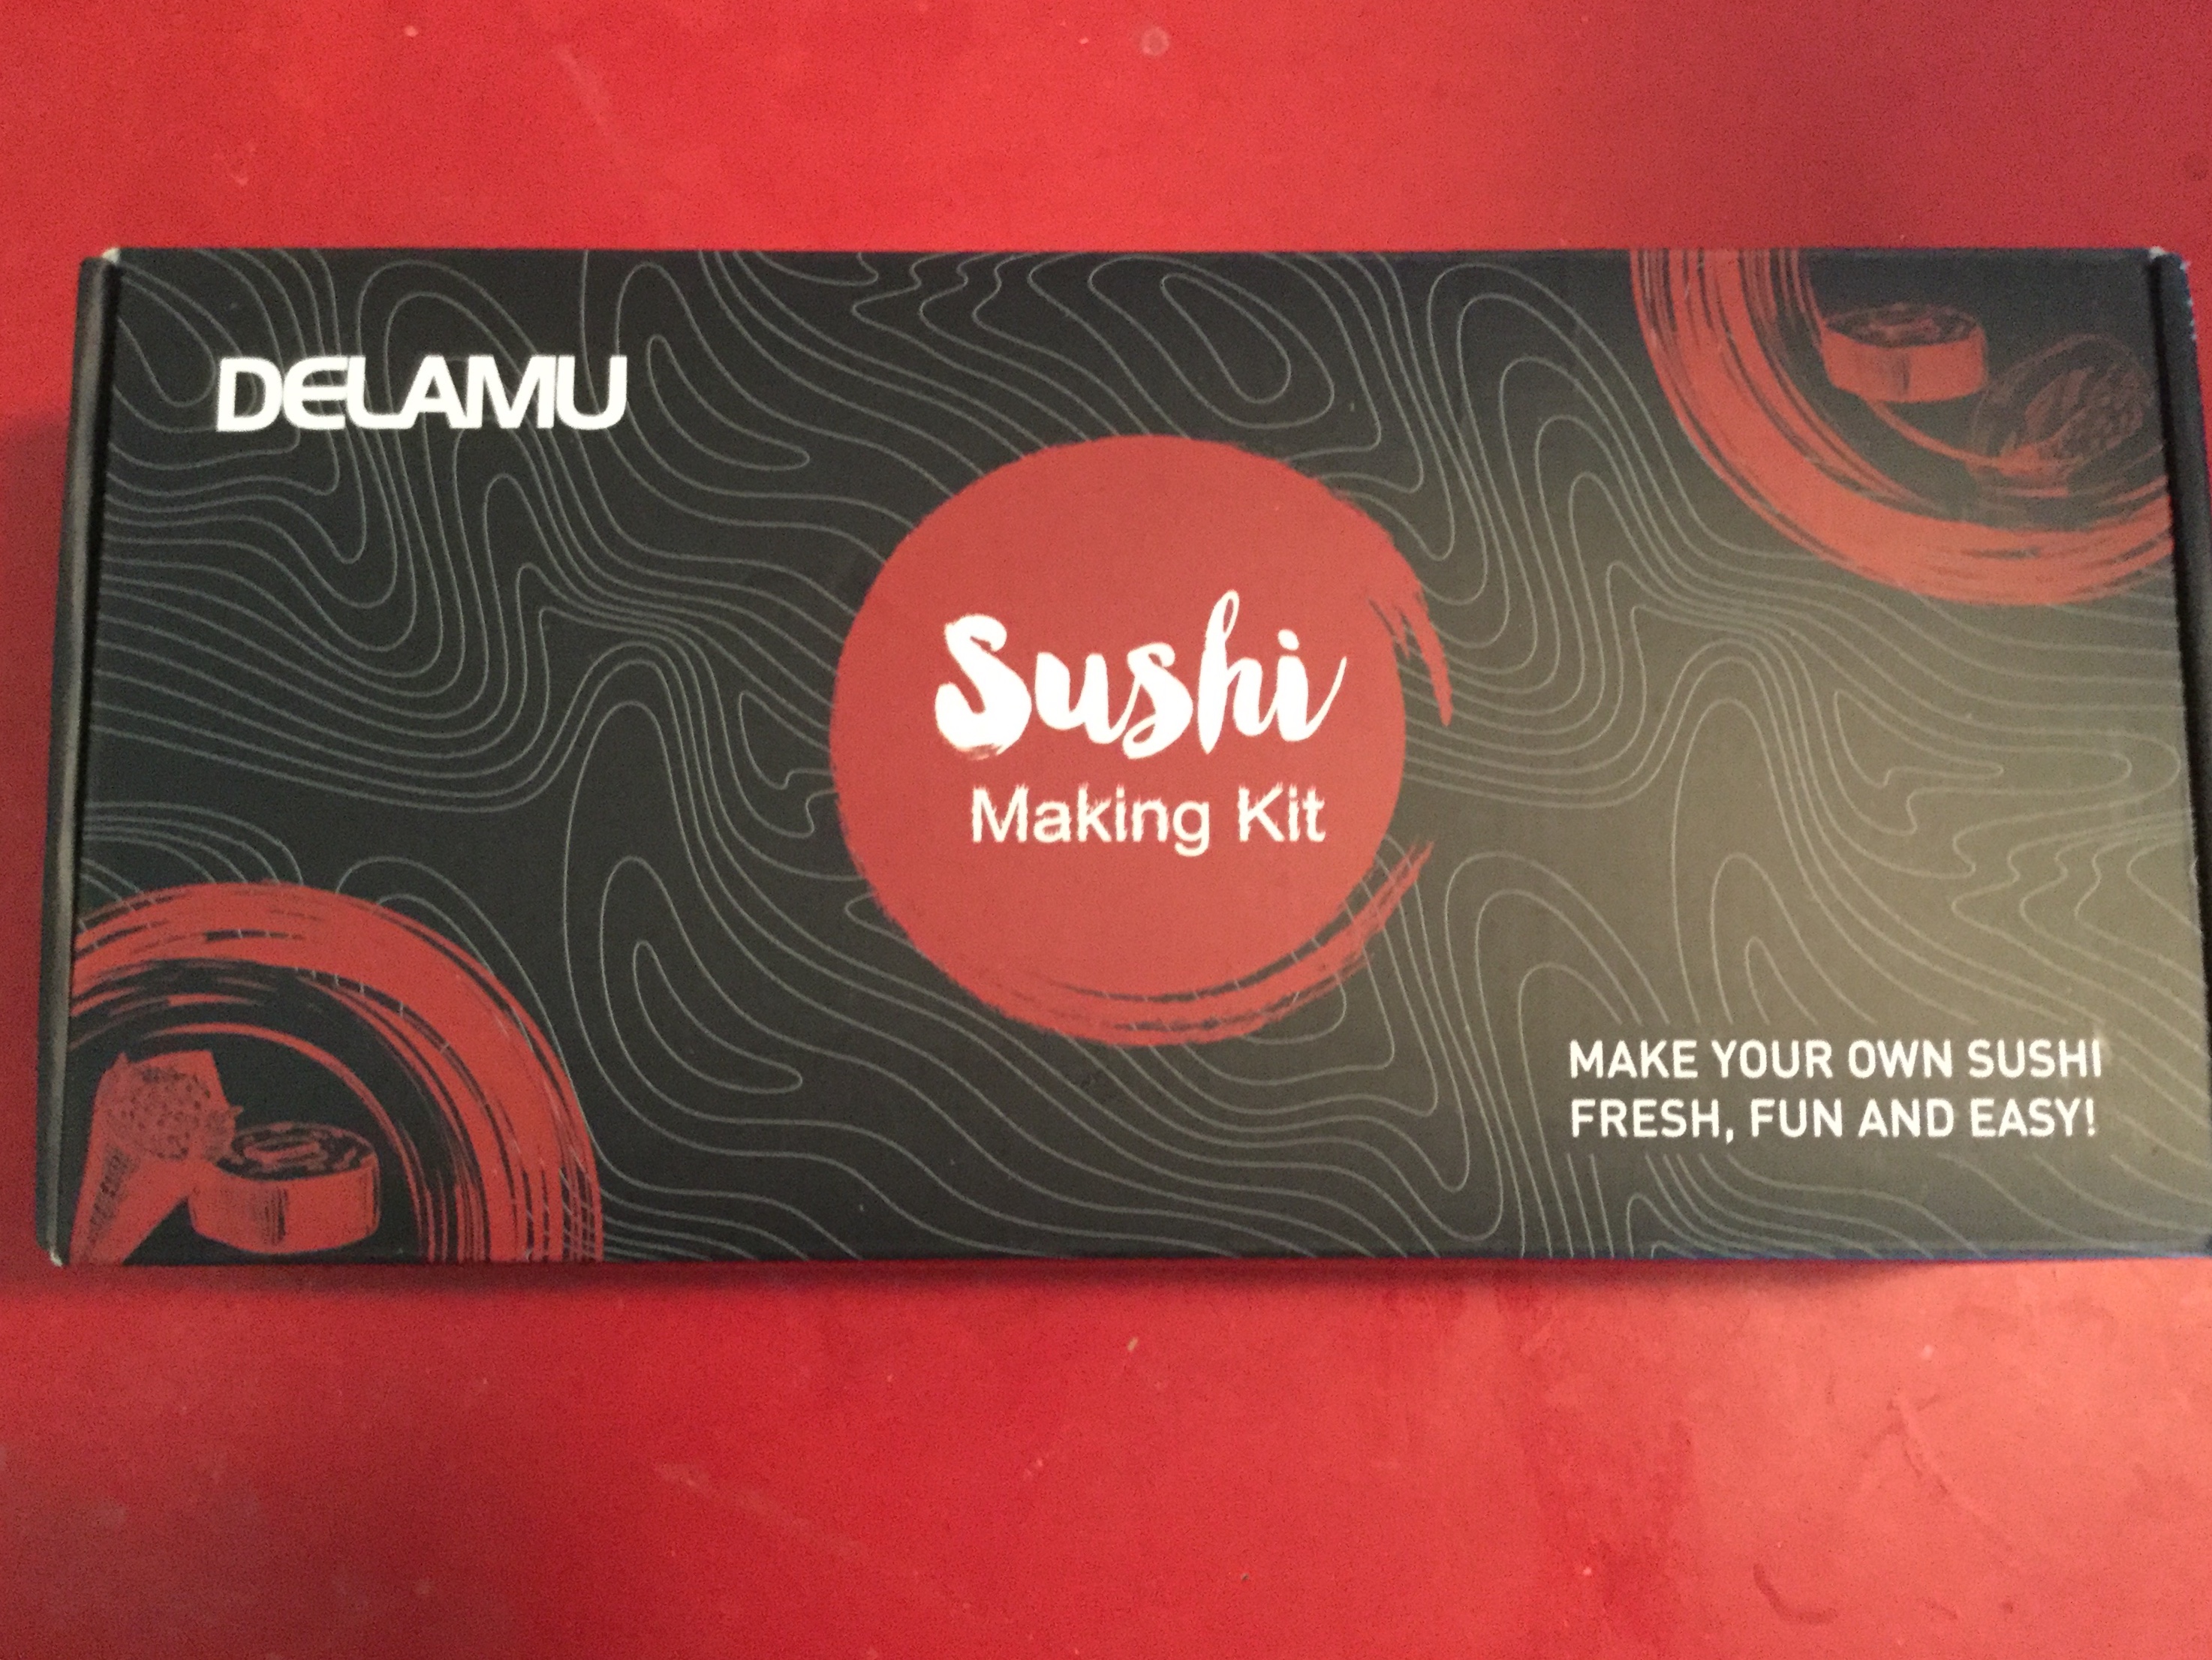 Trying out the Delamu Sushi Making Kit – Ms. Mimsy Reviews